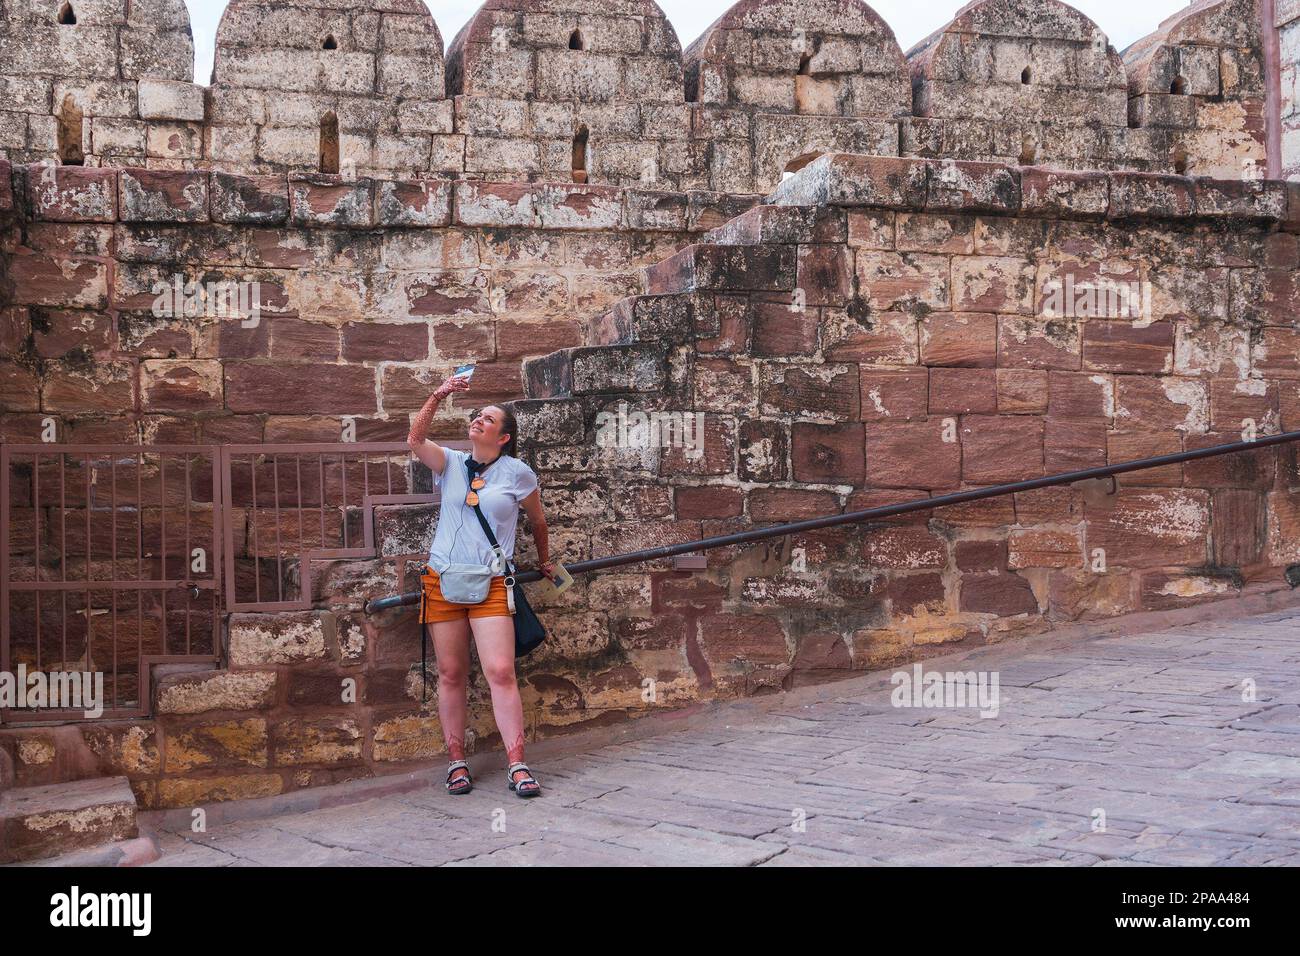 Jodhpur, Rajasthan, India - 19th October 2019 : Foreigner woman tourist taking photograph of famous Mehrangarh fort, Mehrangarh Fort is UNESCO site. Stock Photo